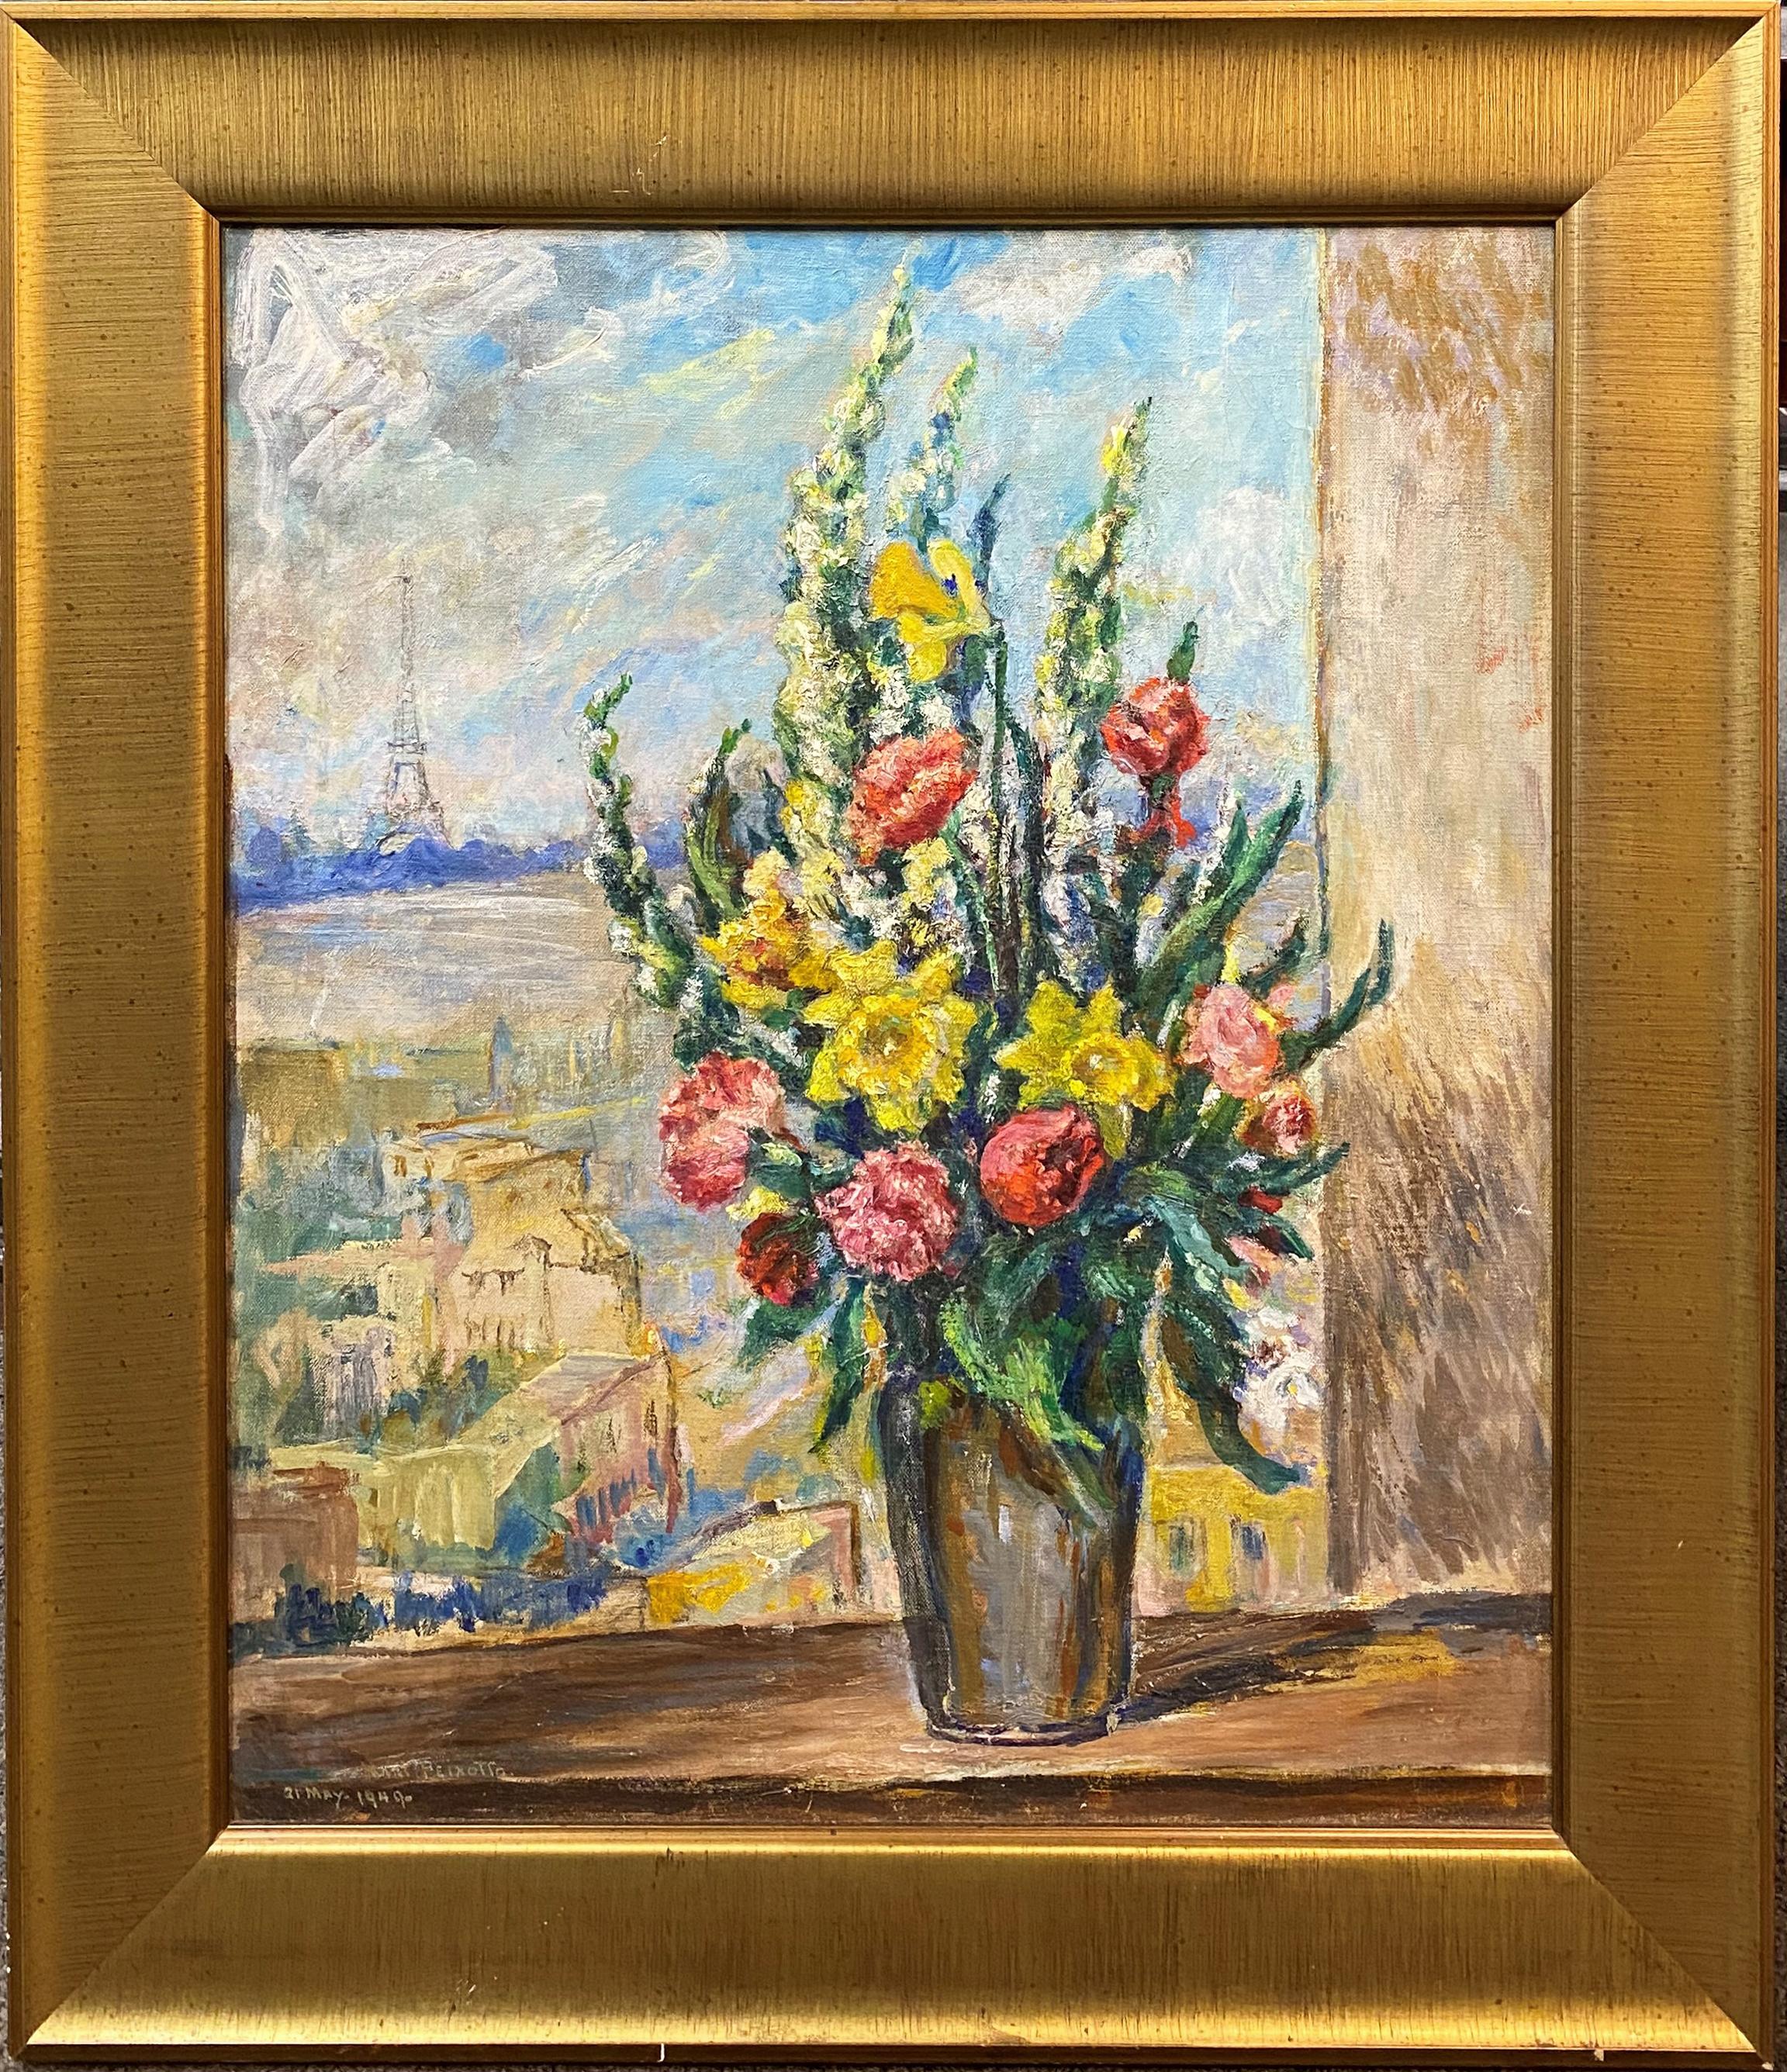 Flowers in a Vase with the Eiffel Tower